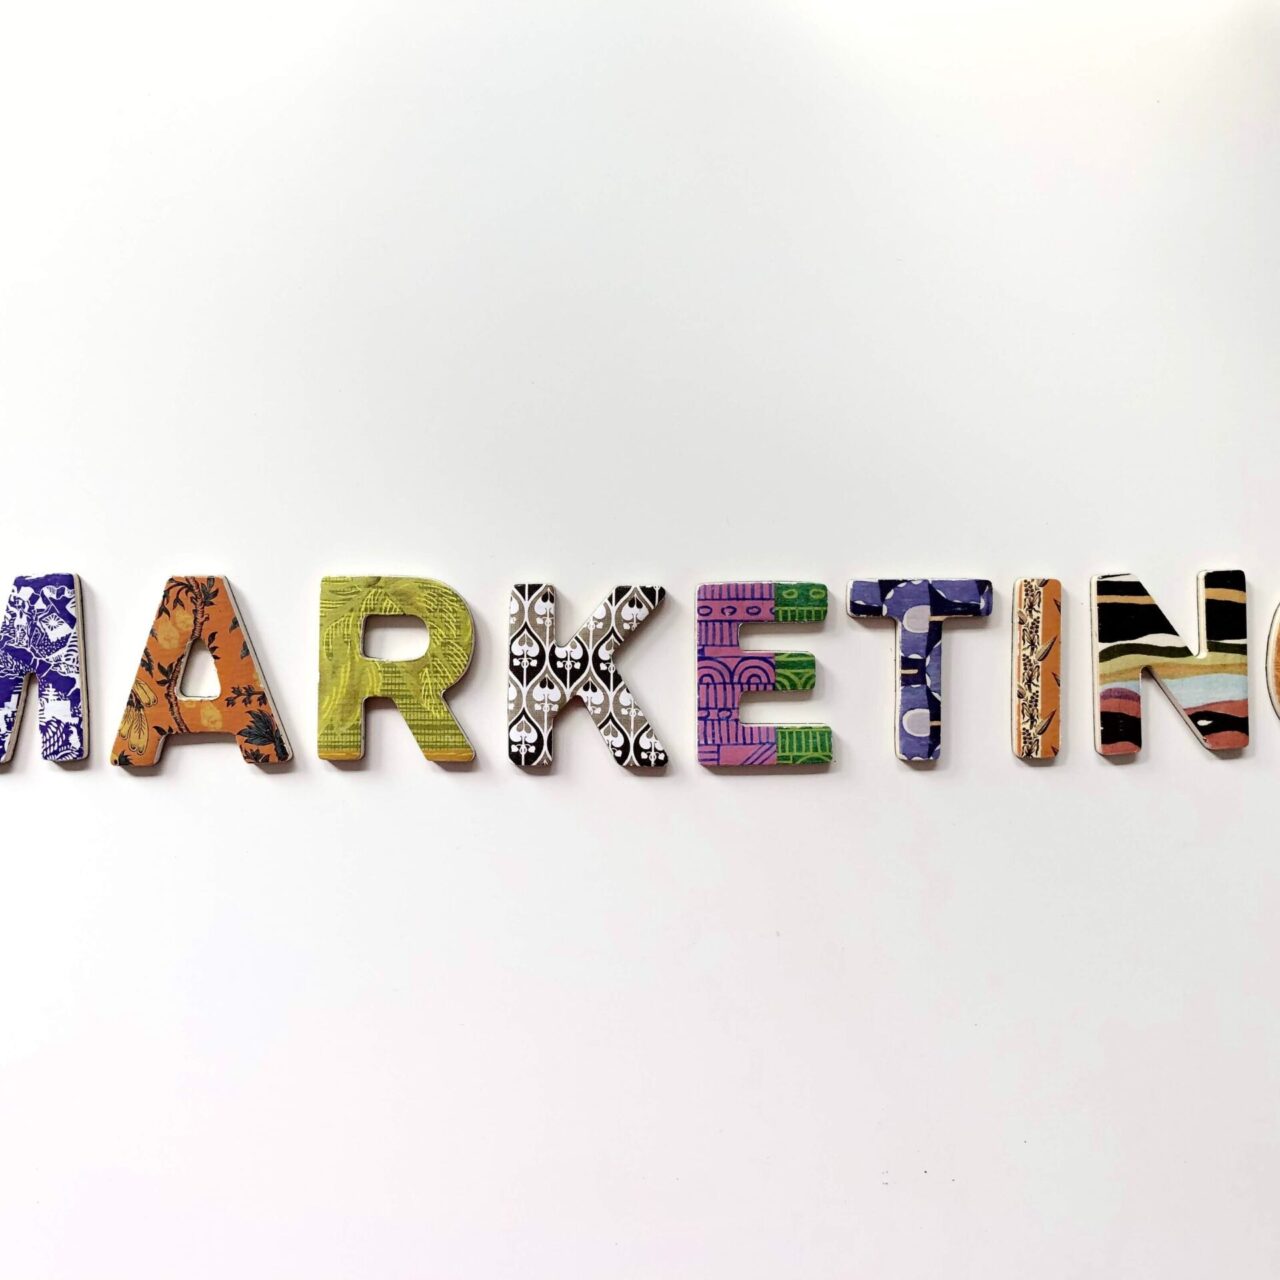 Why Affiliate Marketing is Essential